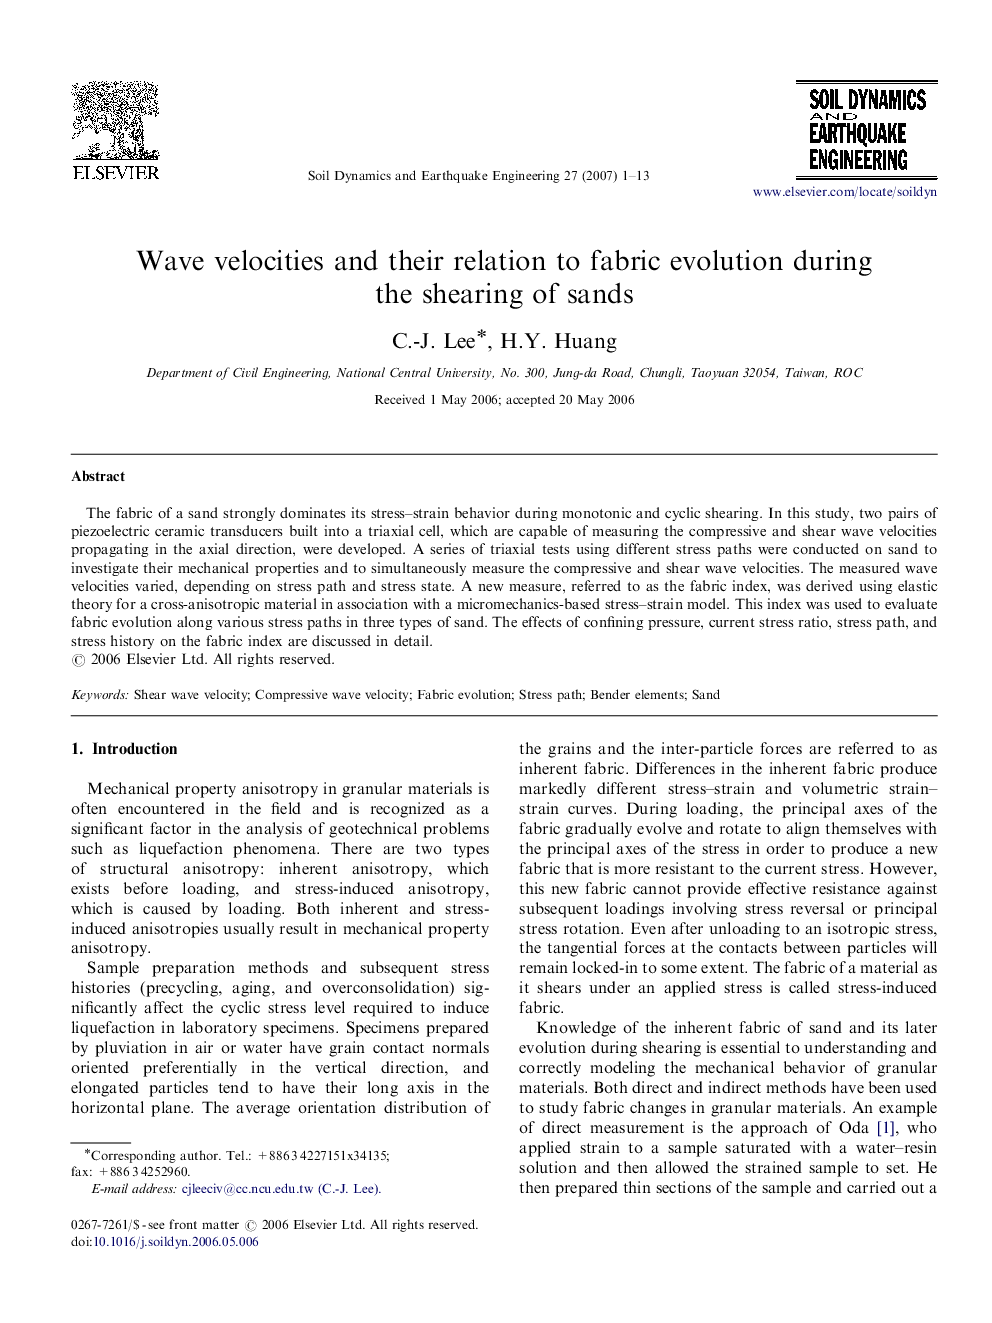 Wave velocities and their relation to fabric evolution during the shearing of sands